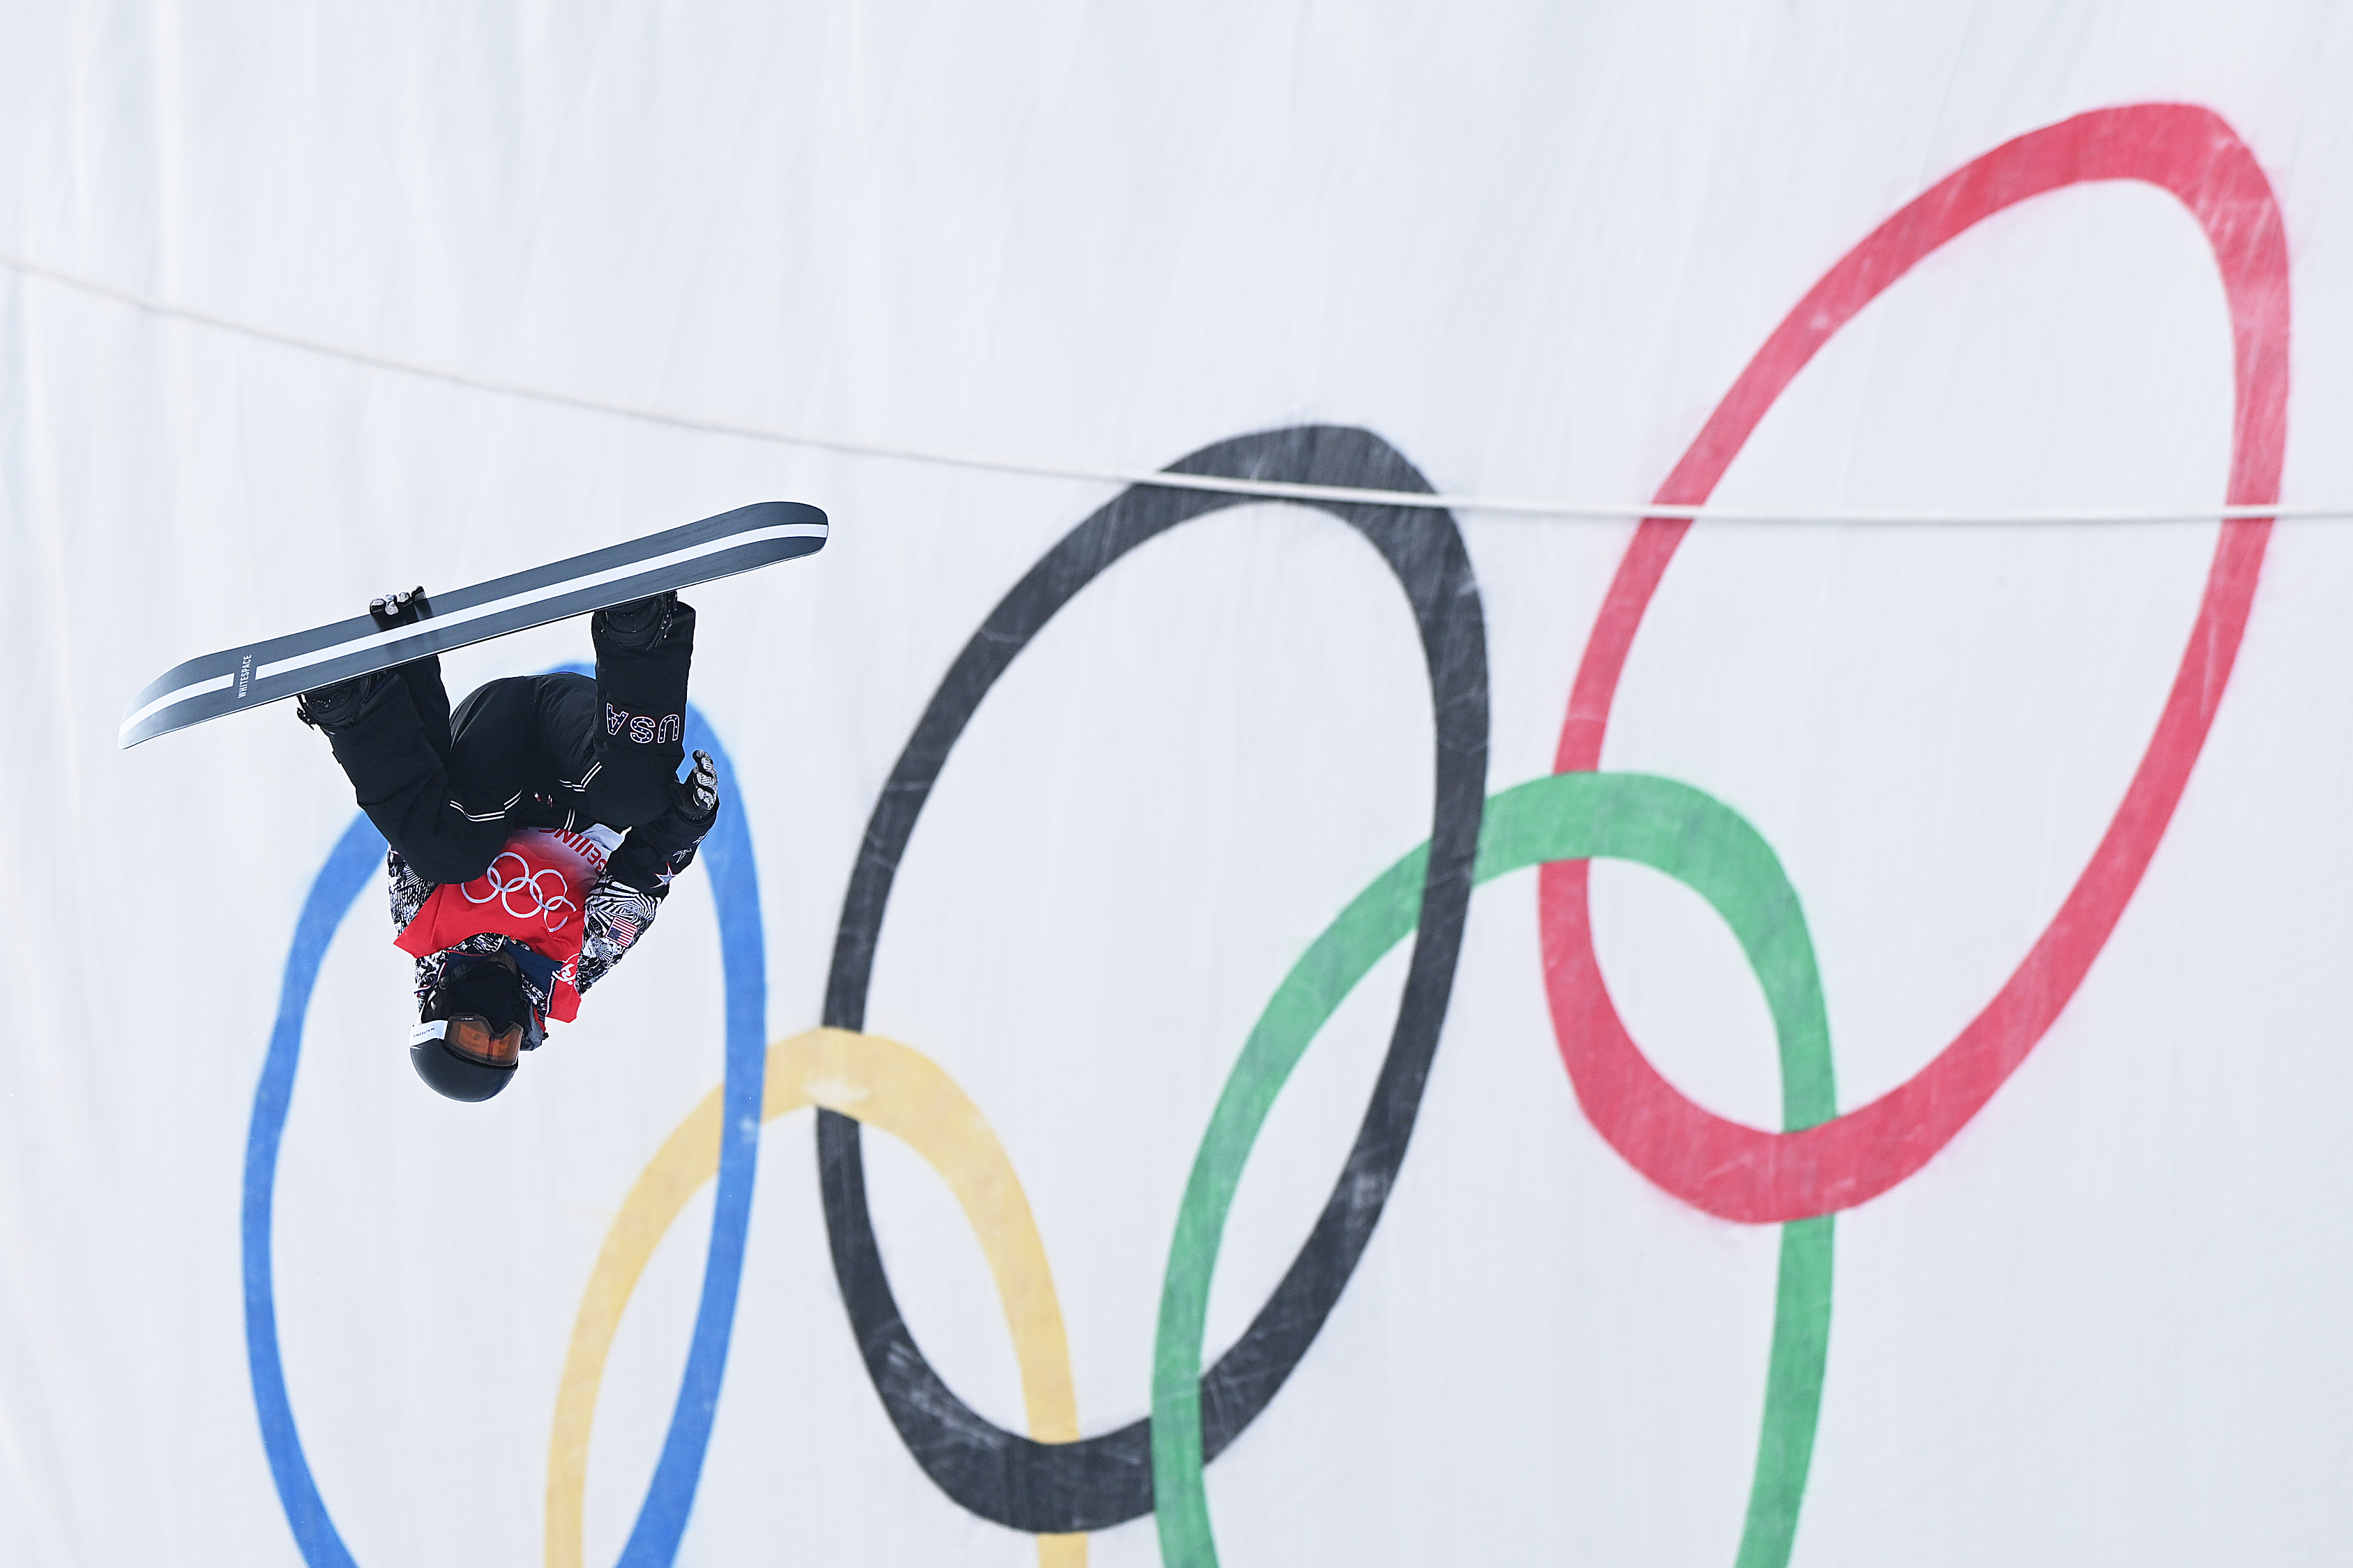 Shaun White Qualifies for Halfpipe Final After All-or-Nothing Second Run